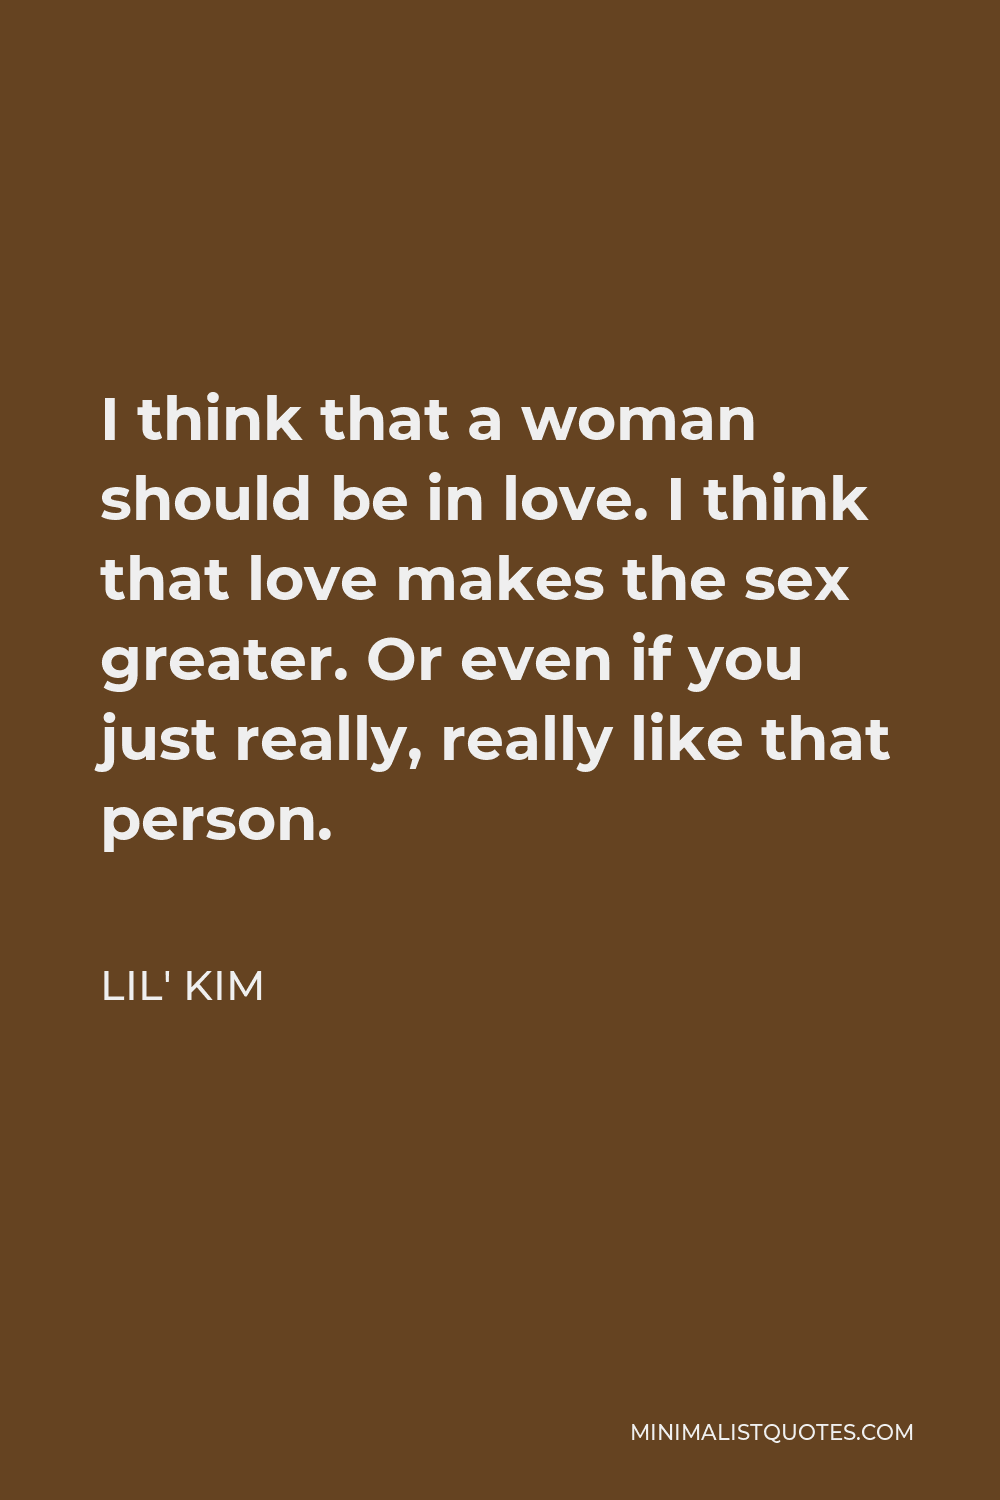 Lil' Kim Quote: I think that a woman should be in love. I think that love  makes the sex greater. Or even if you just really, really like that person.